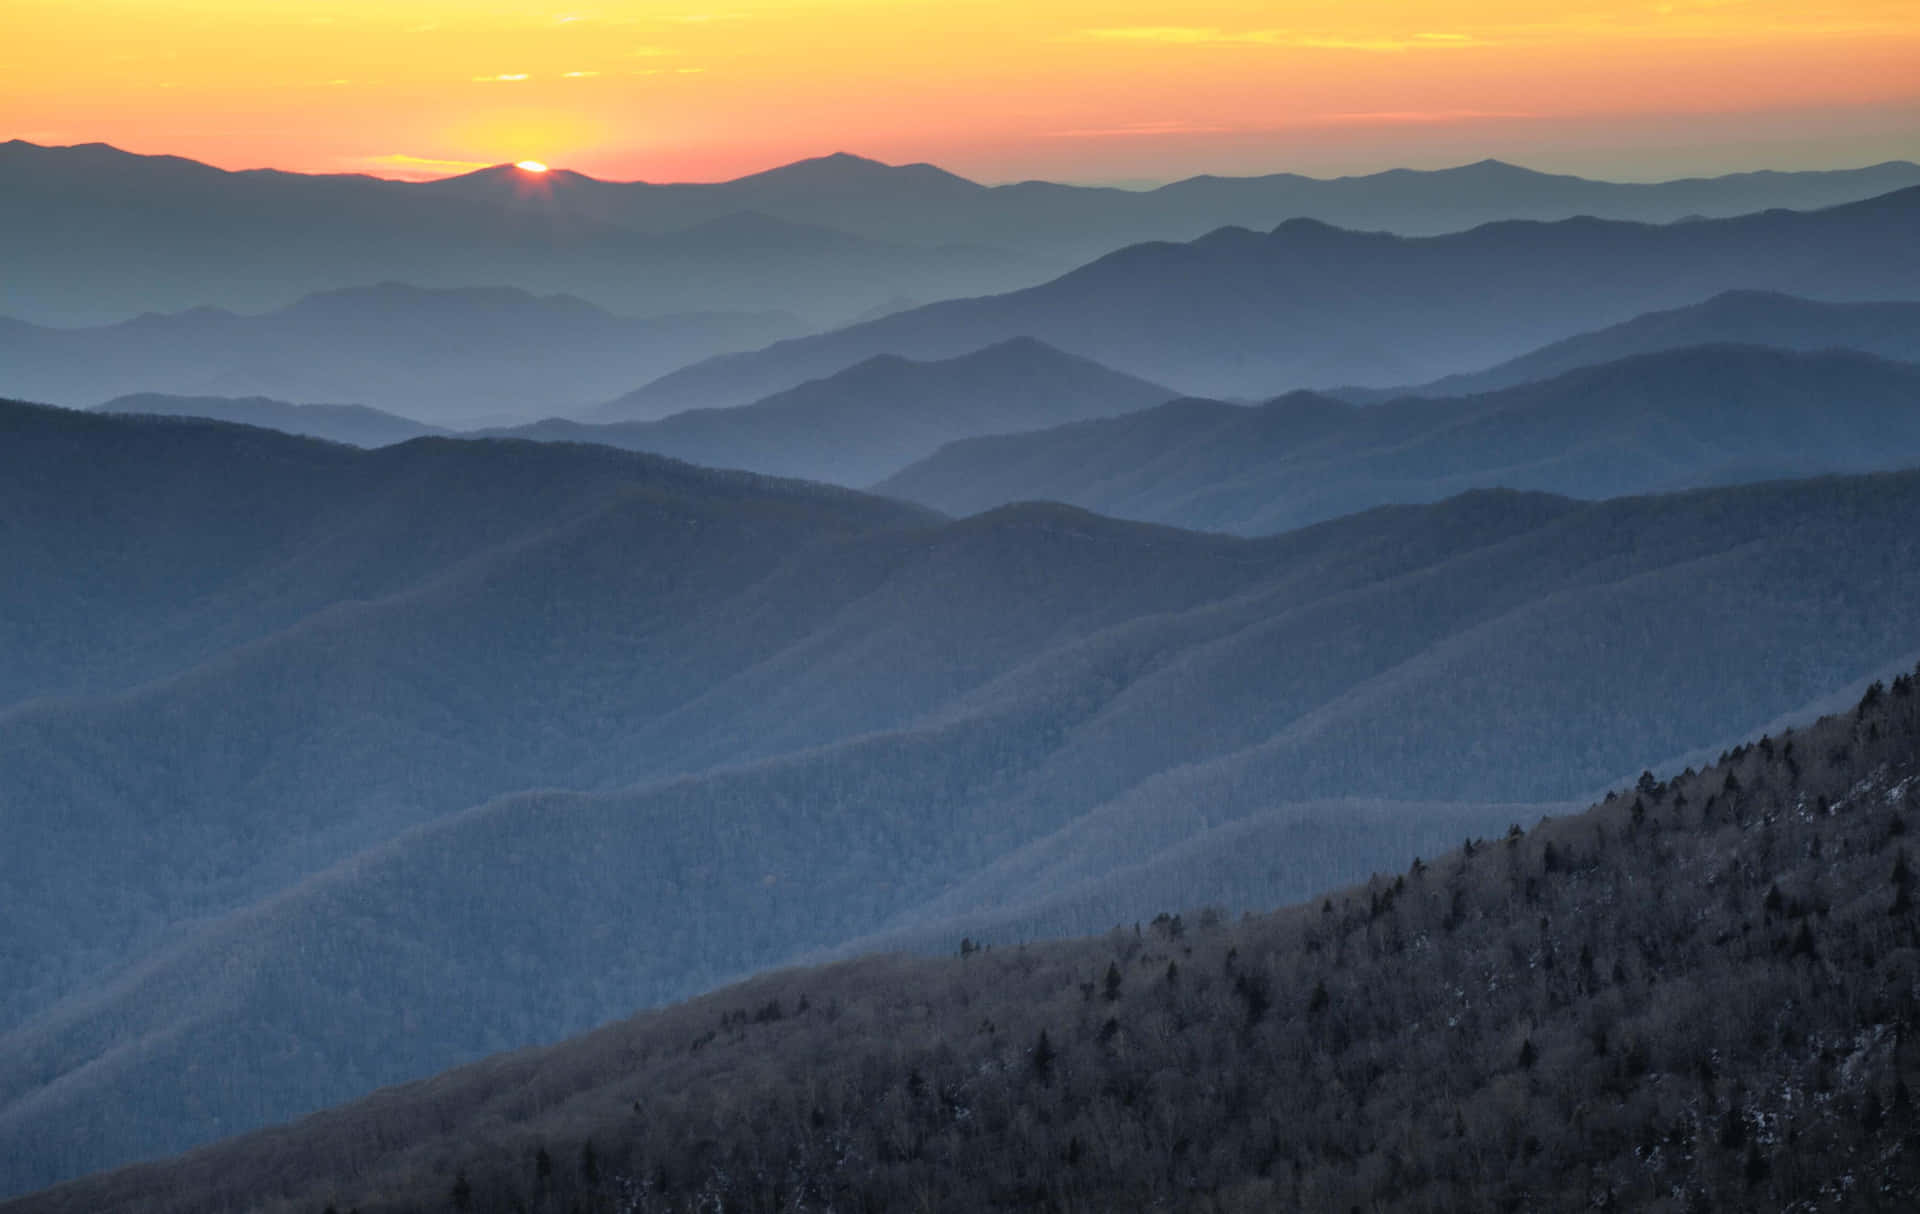 "The stunning beauty of the Blue Ridge Mountains". Wallpaper